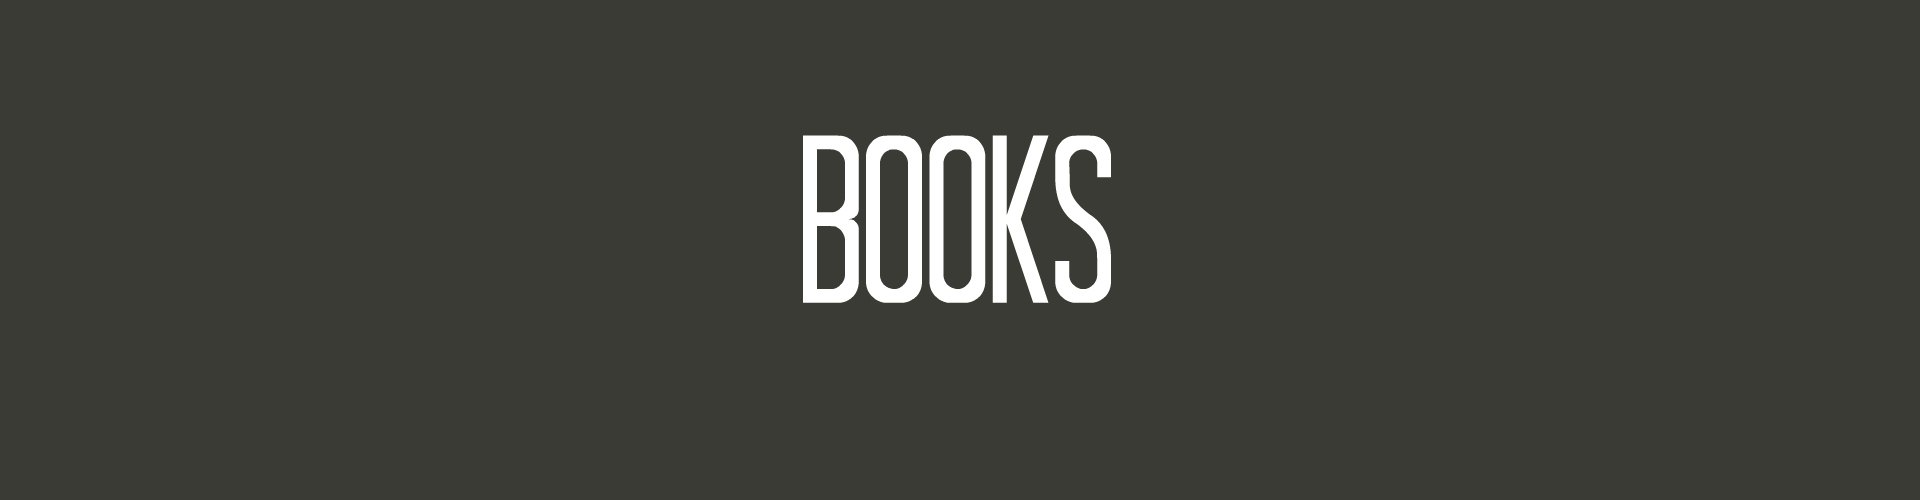 Books page banner